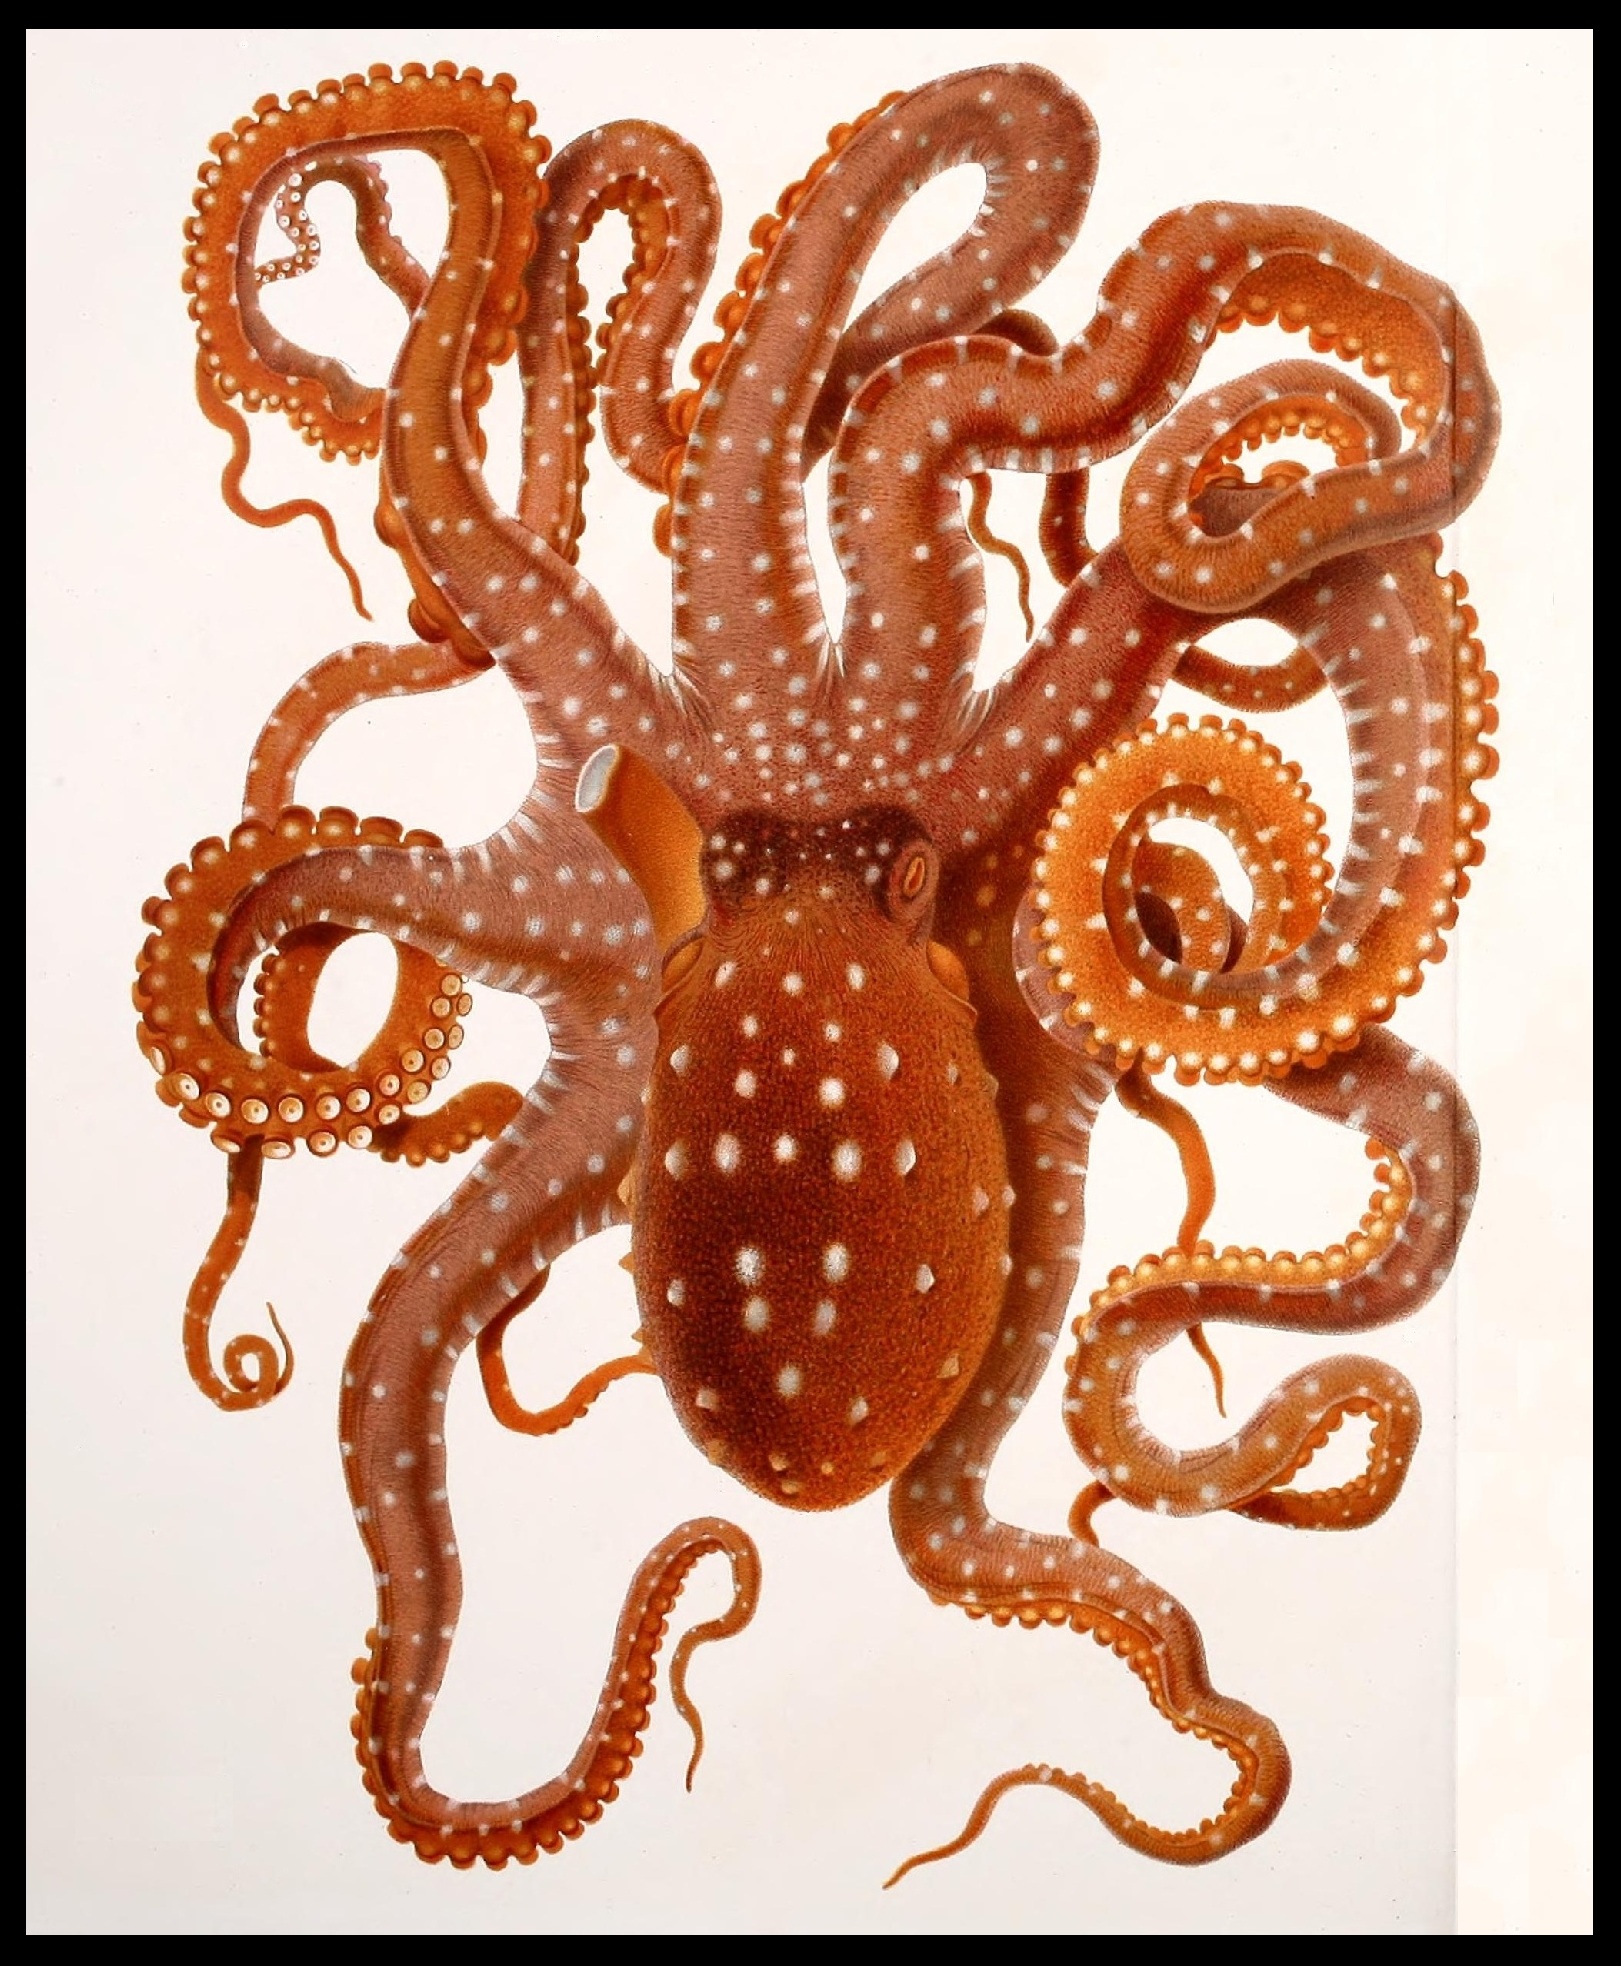 a brown octo sitting on top of a white floor